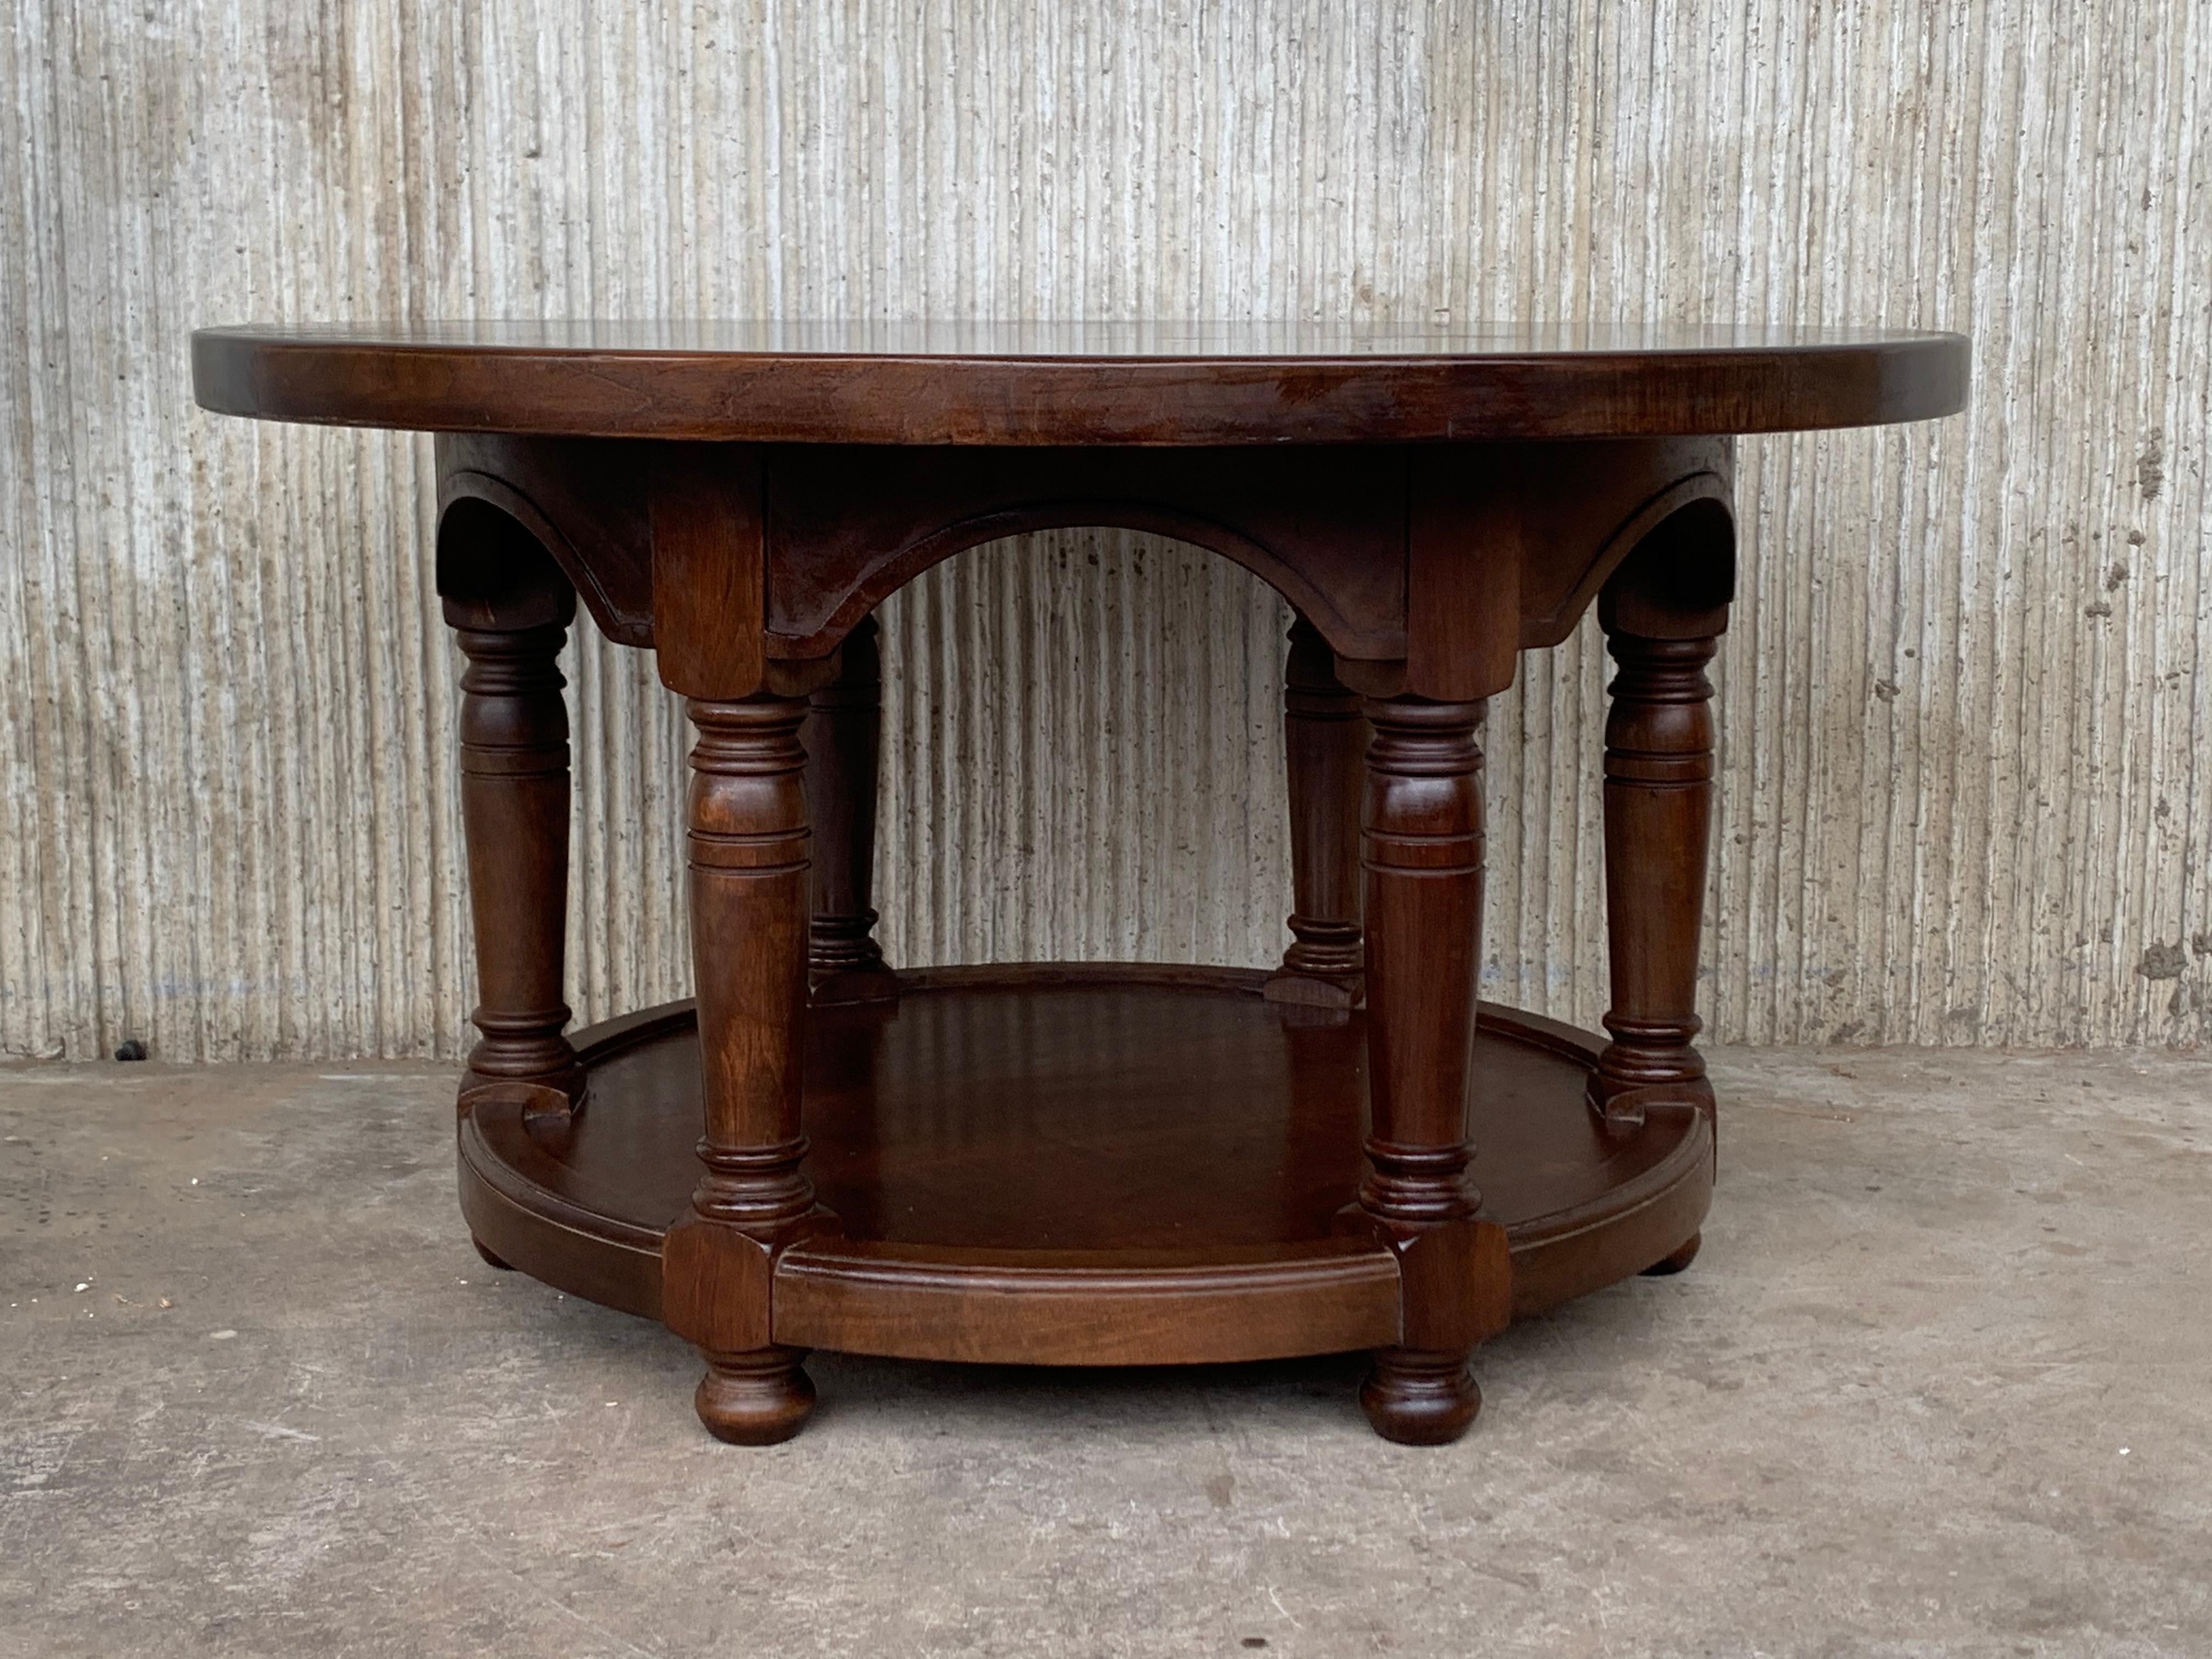 Spanish style two tier round side table with burl top over a richly four legs from the 20th century. 
The old age patina shows the history of the piece. Perfect to be used as a side table, coffee table or nightstand.